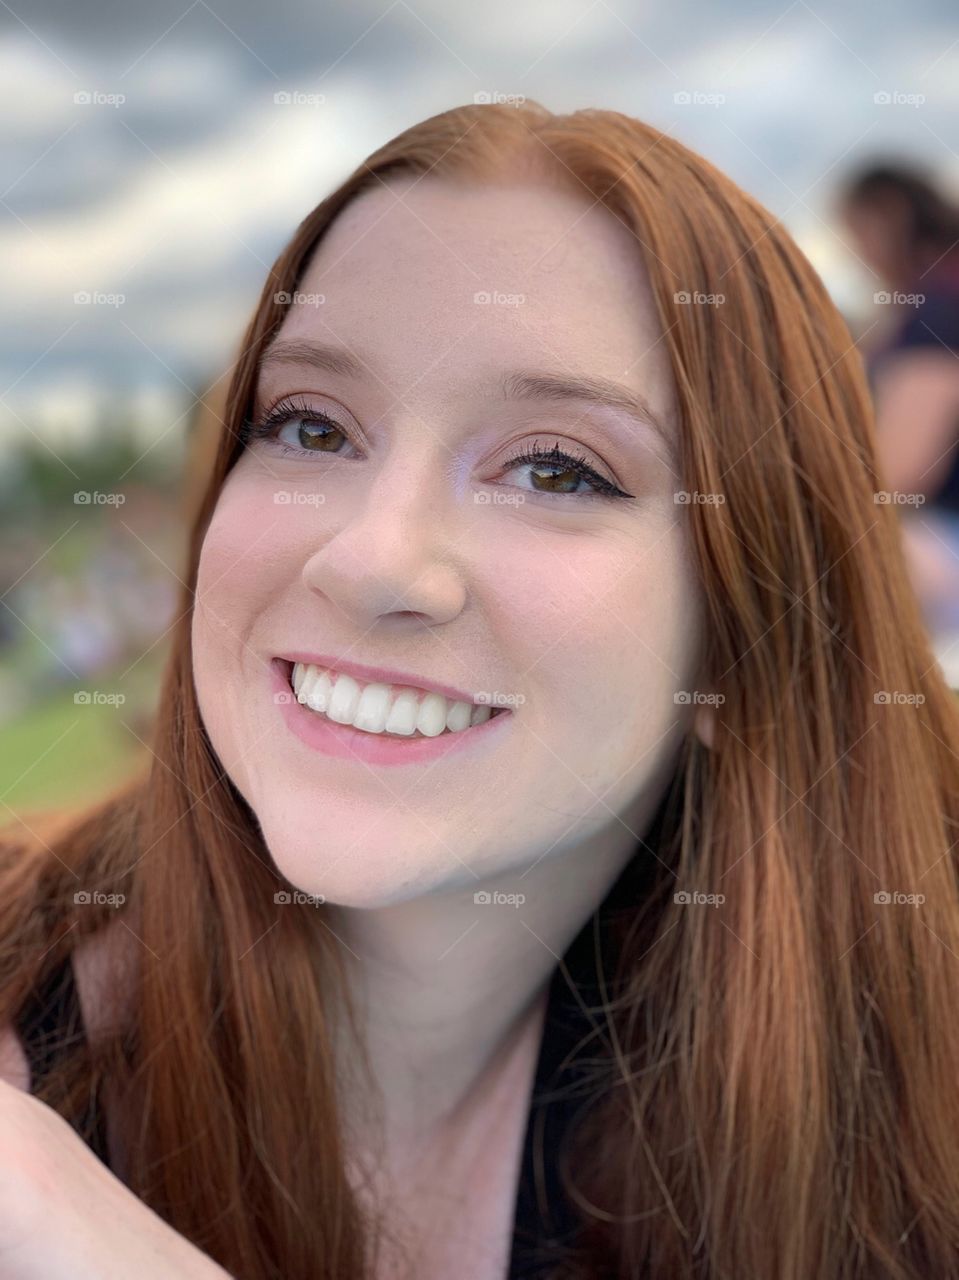 Beautiful redheaded model smiling directly into the camera at a music festival park type event